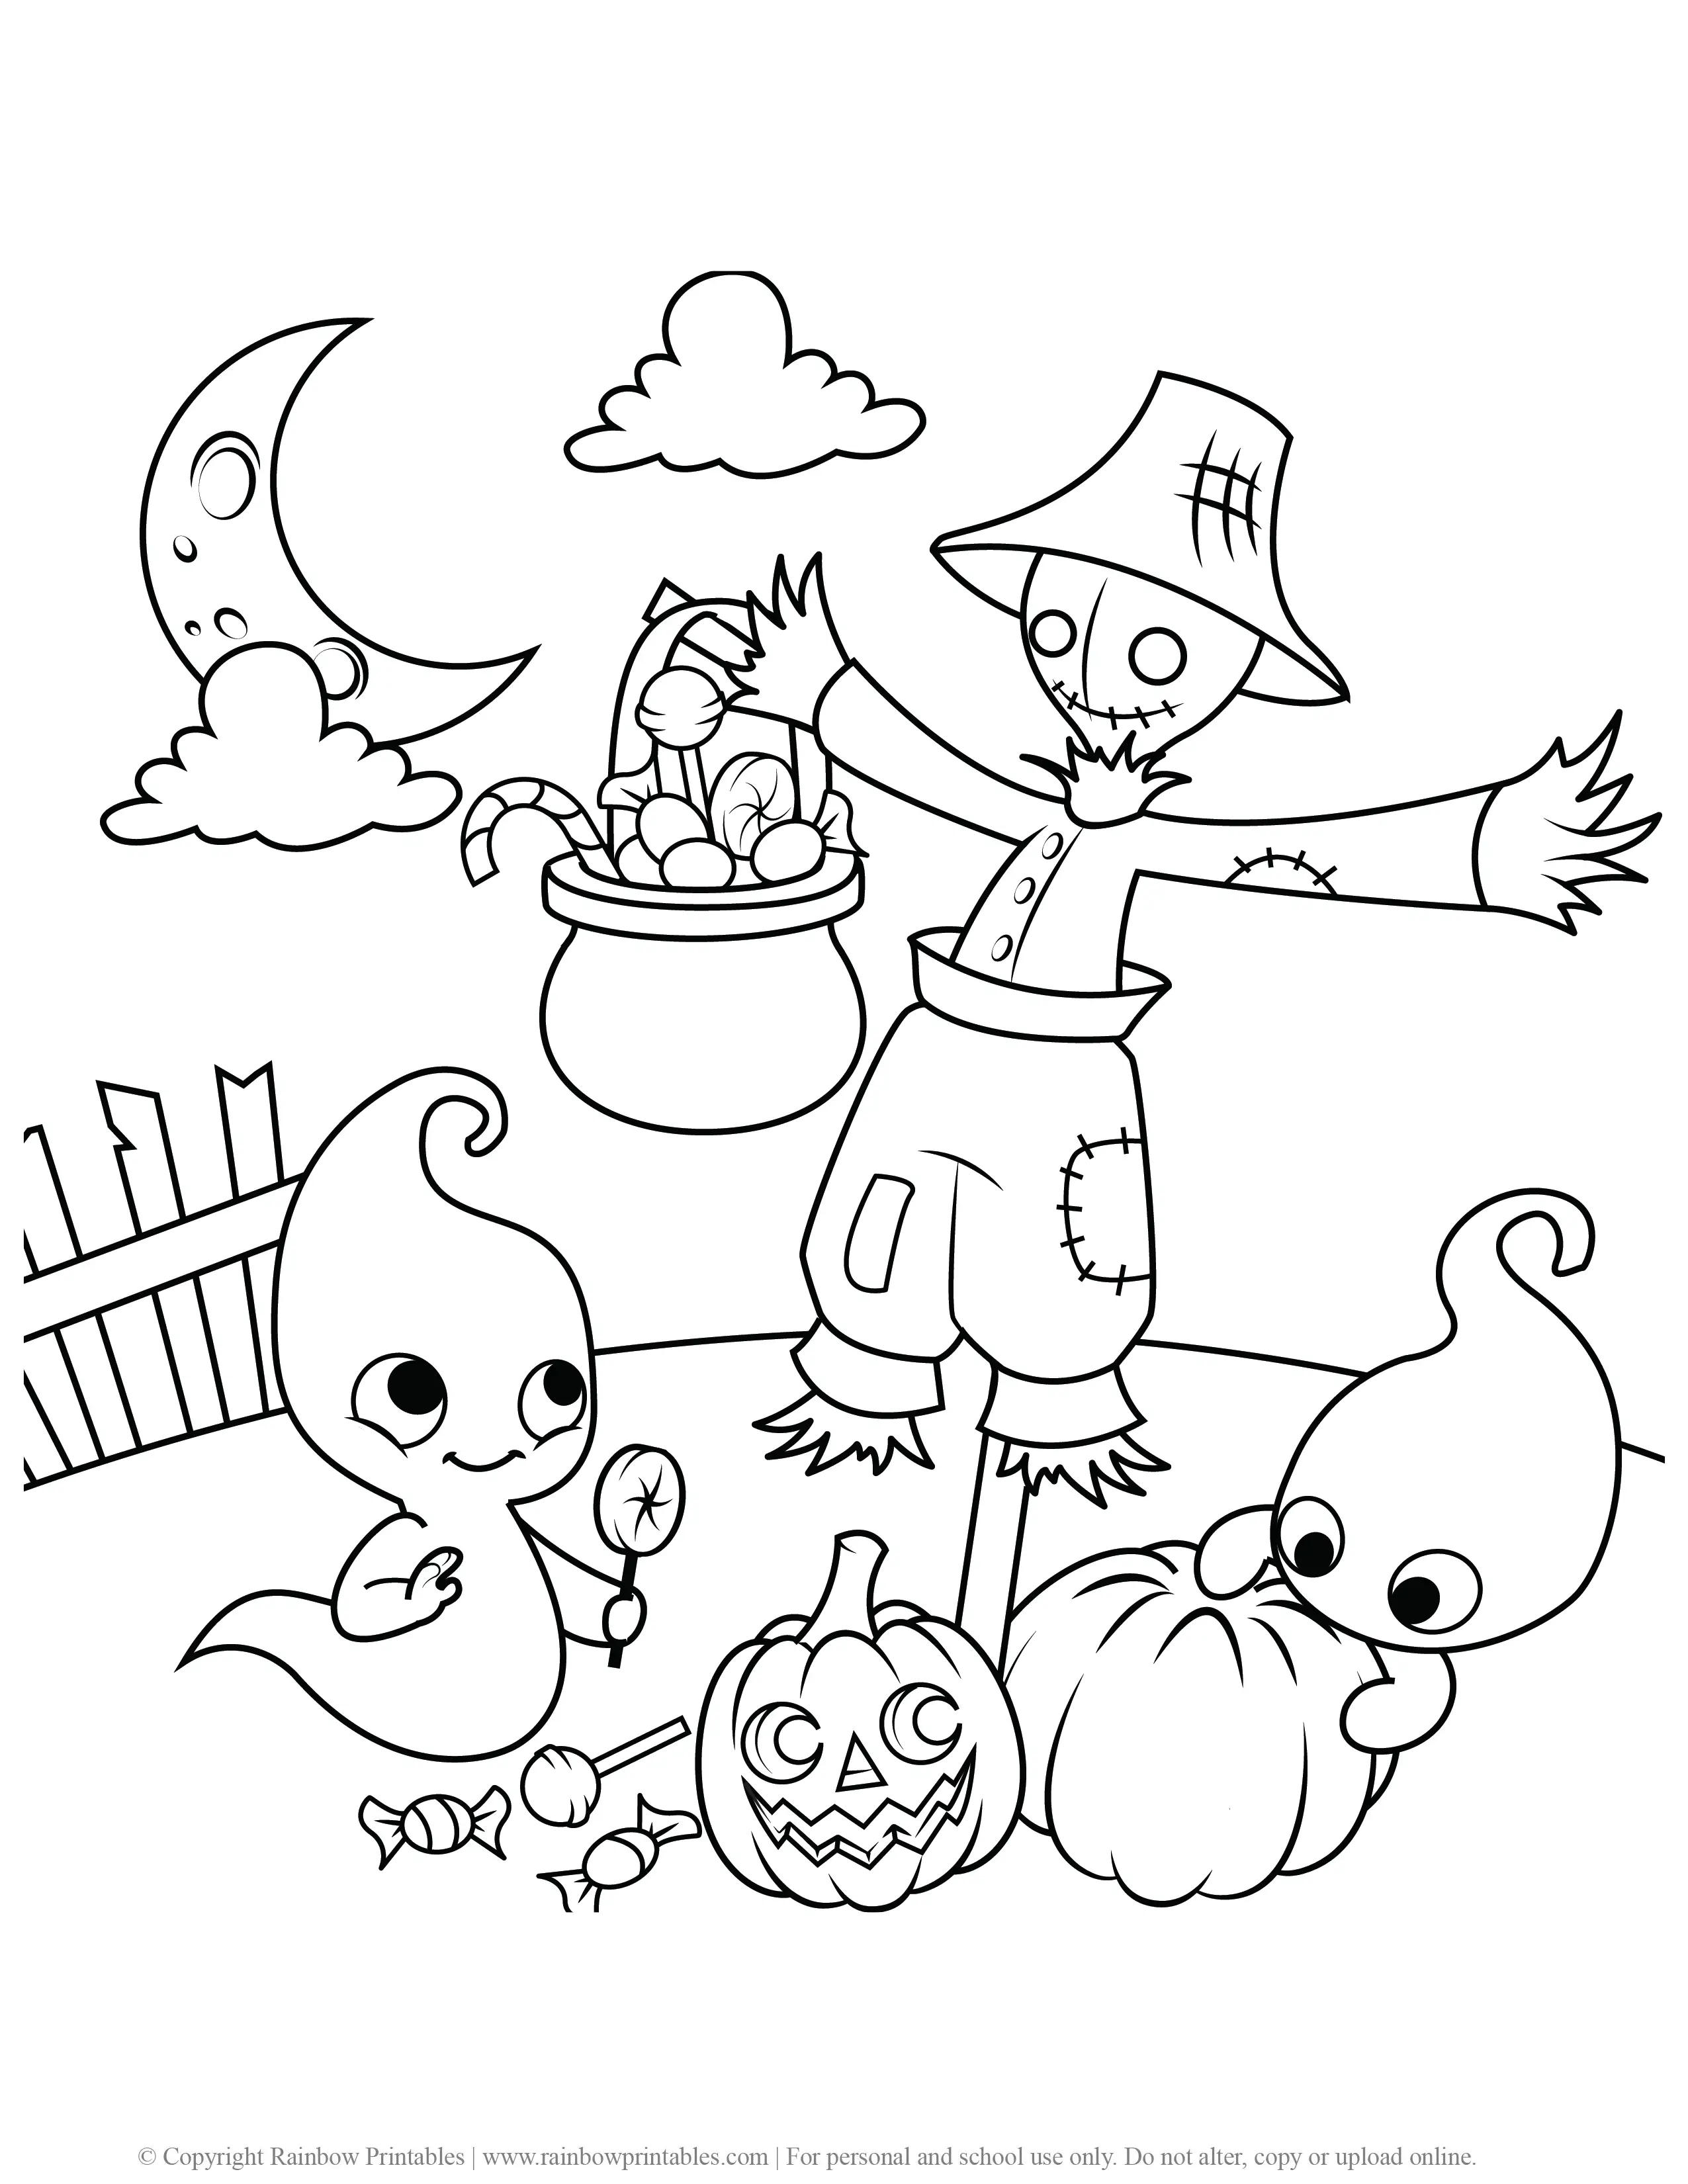 Cute Halloween Coloring Pages   Rainbow Printables